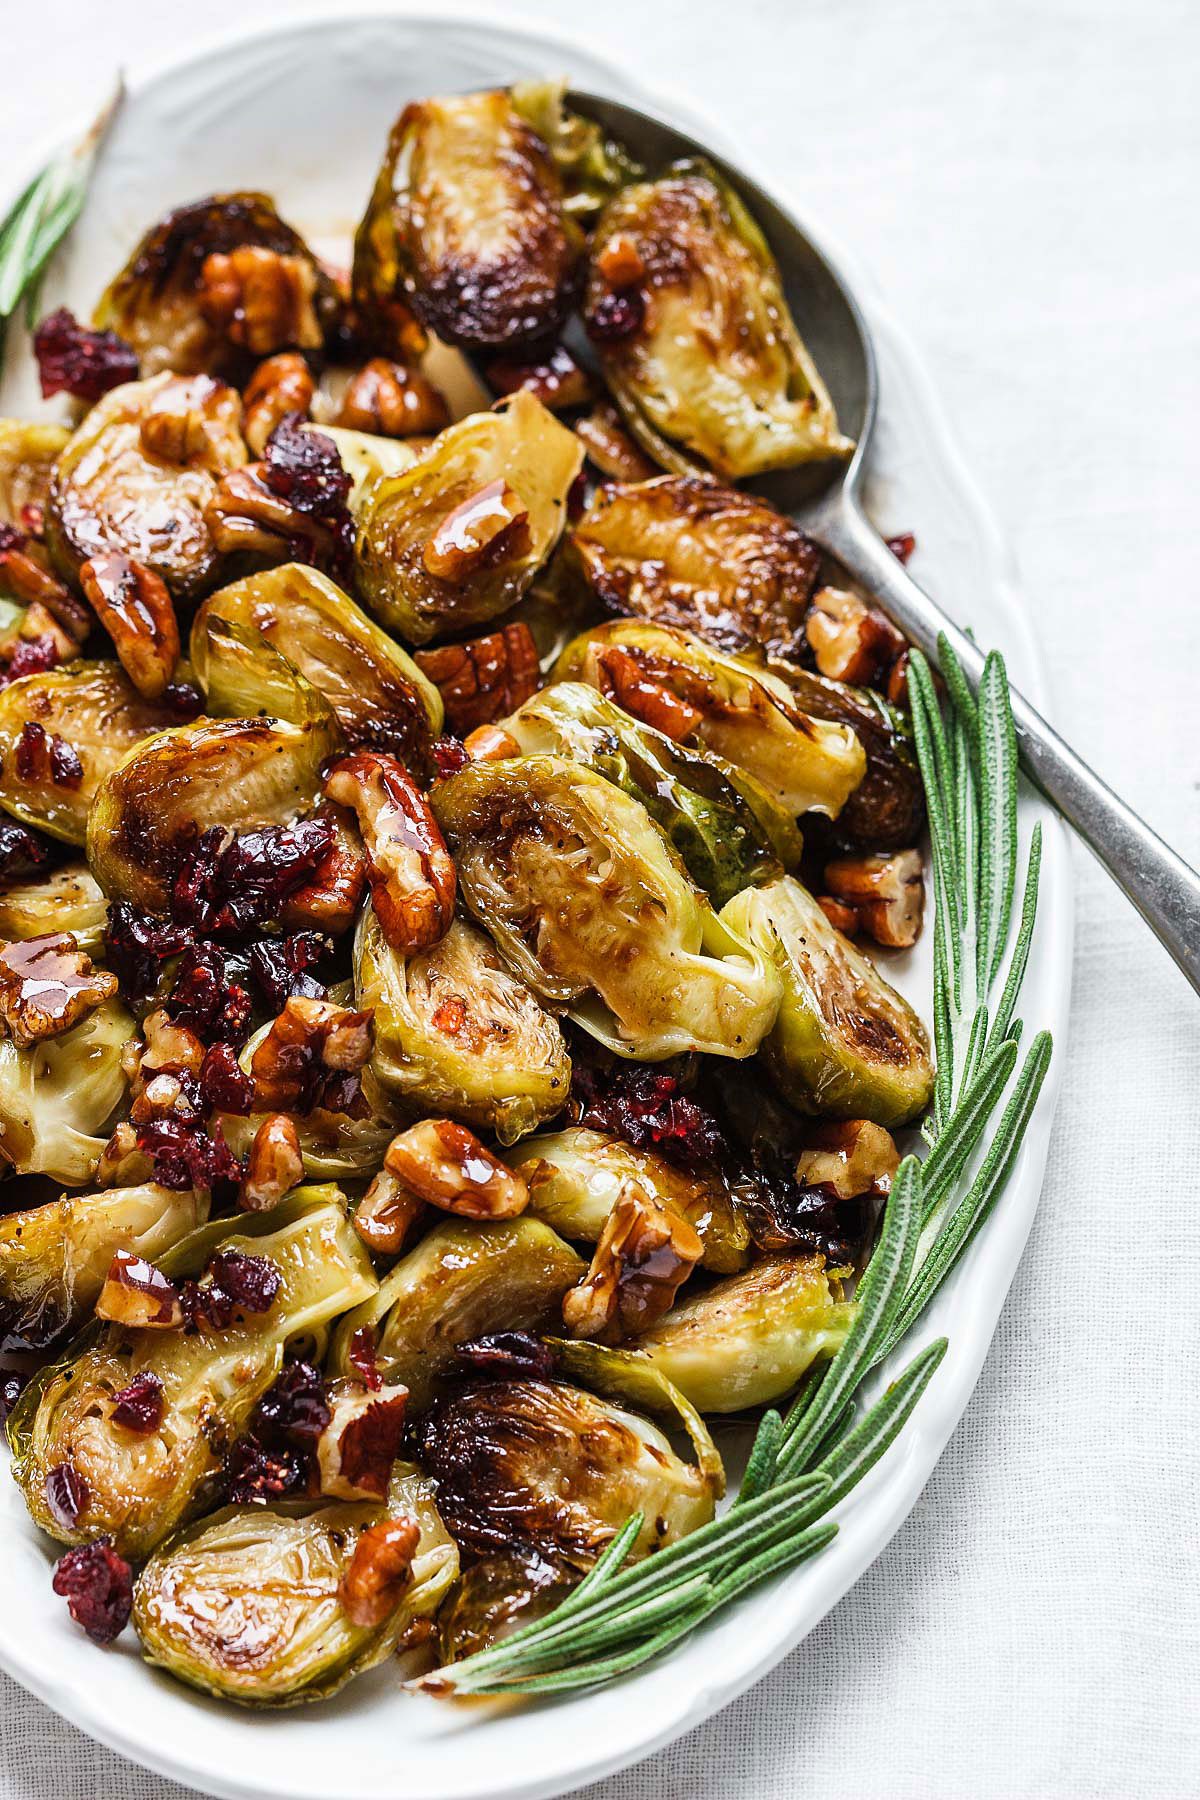 Baked Brussel Sprouts Recipe Balsamic Vinegar ...